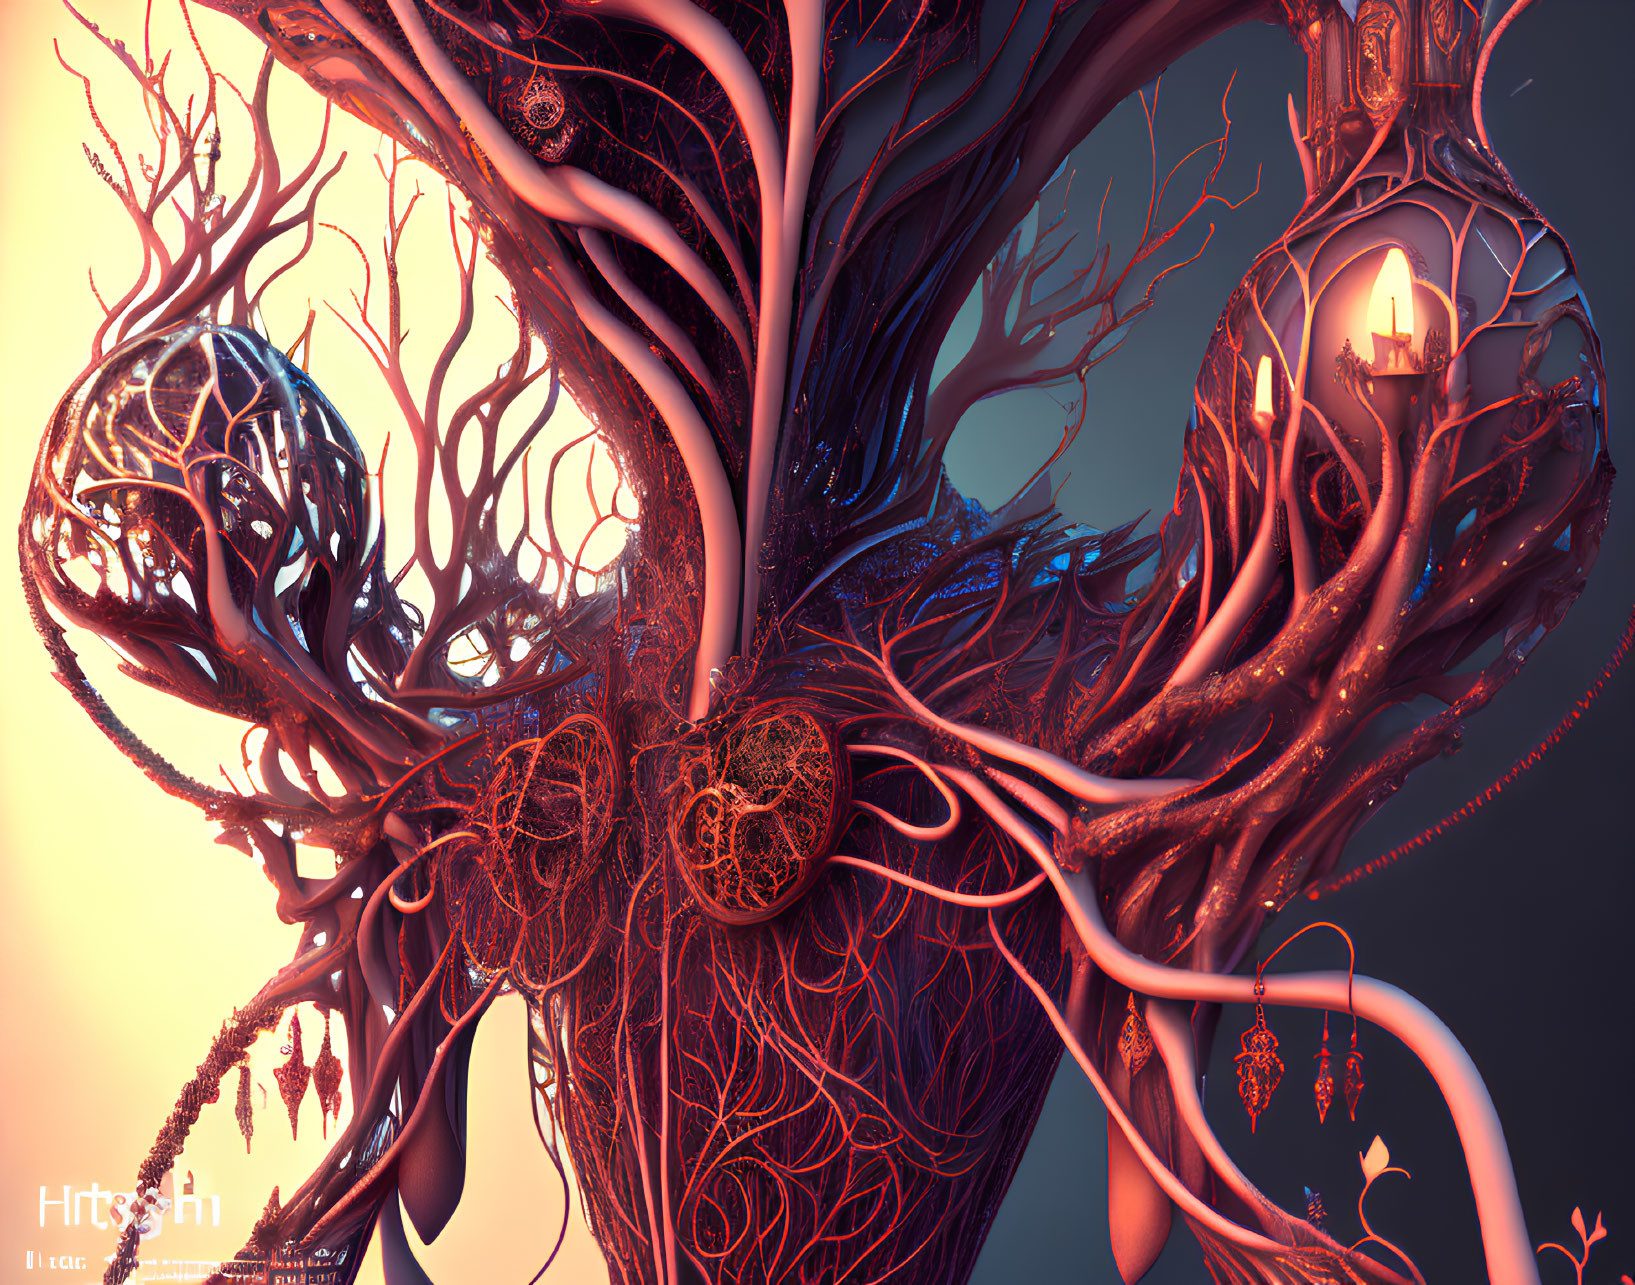 Intricate fractal-like tree with glowing elements in fantastical setting